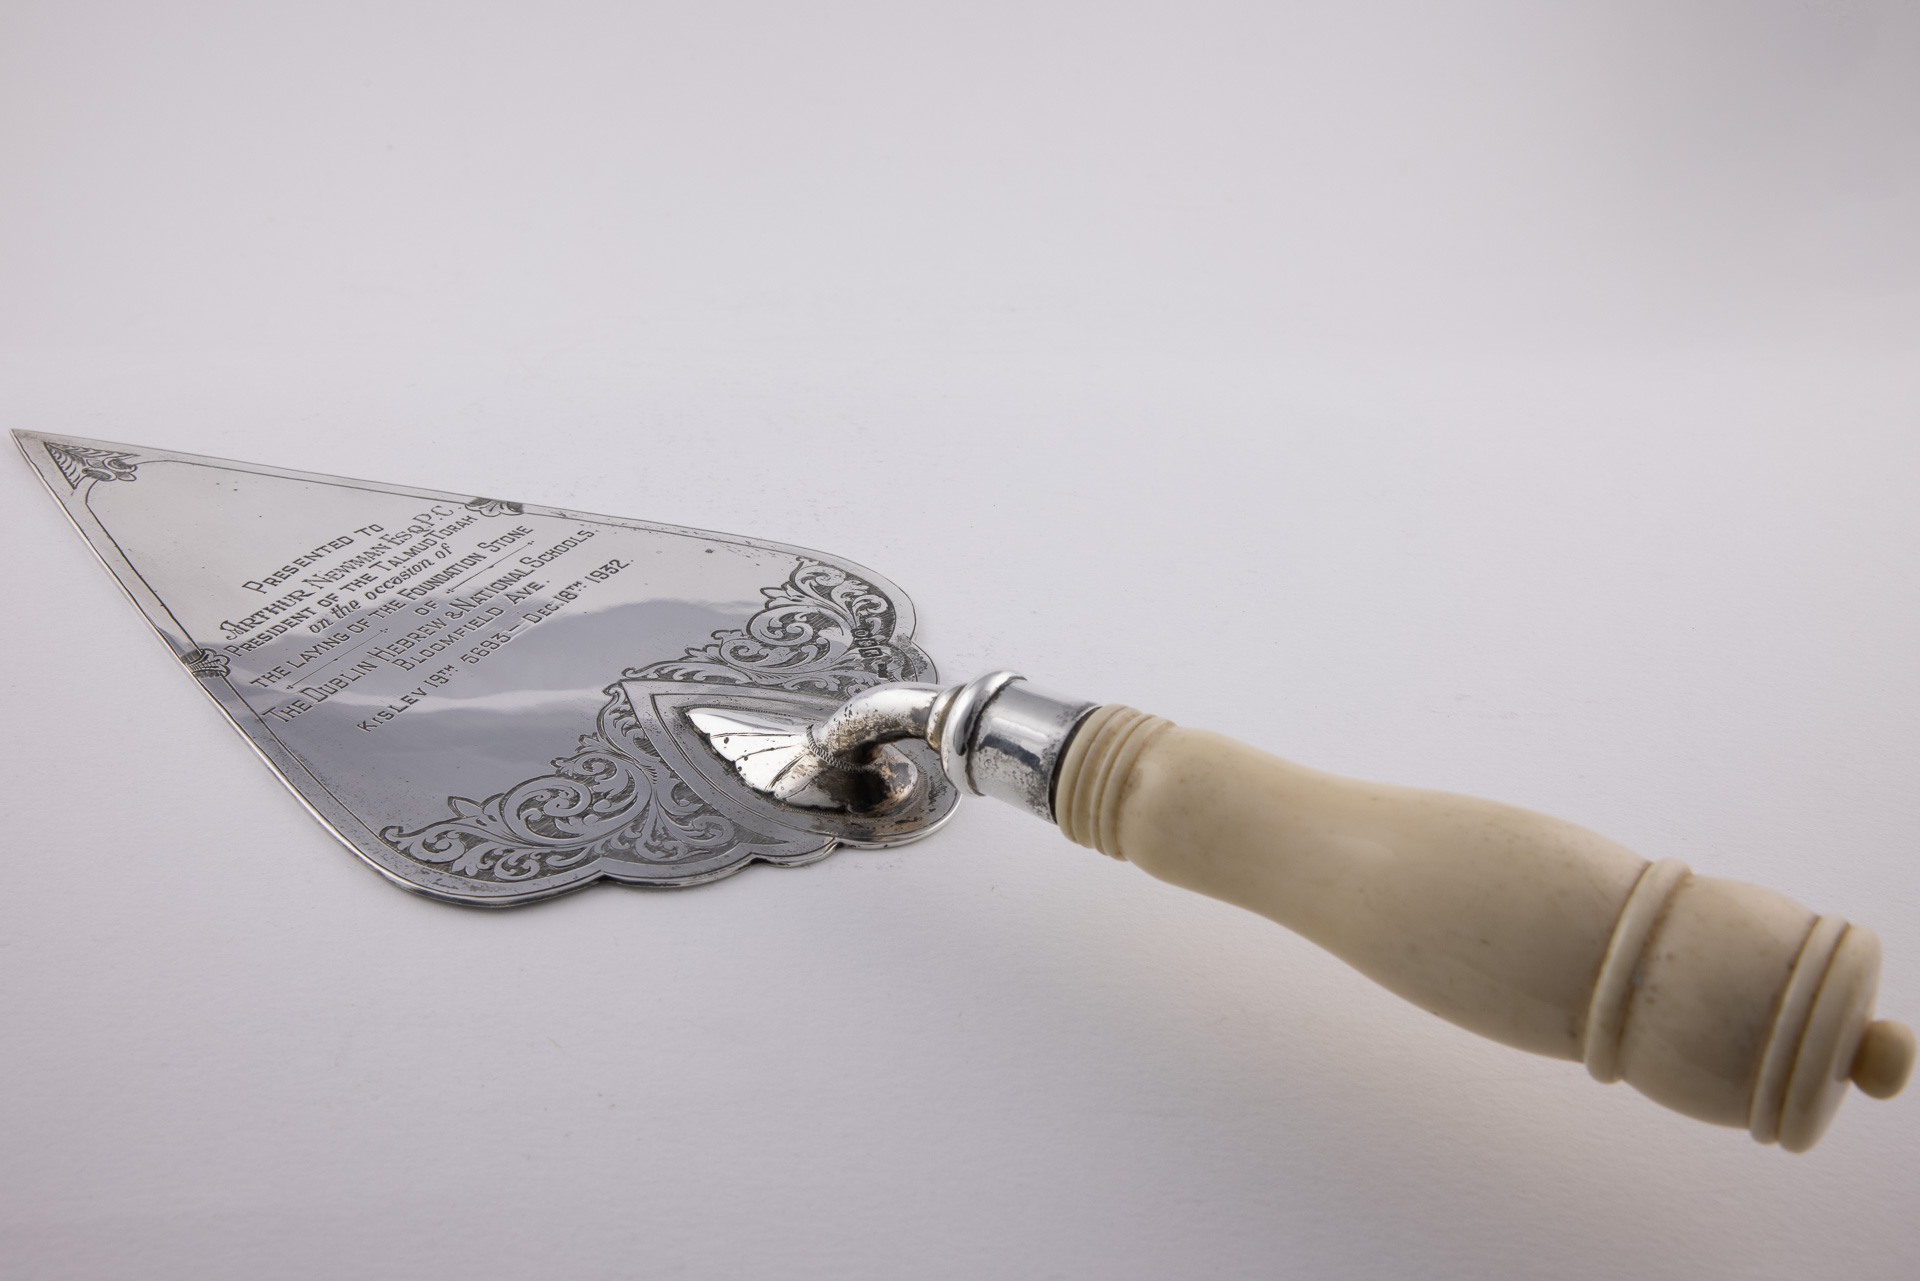 Trowel presented to Arthur Newman